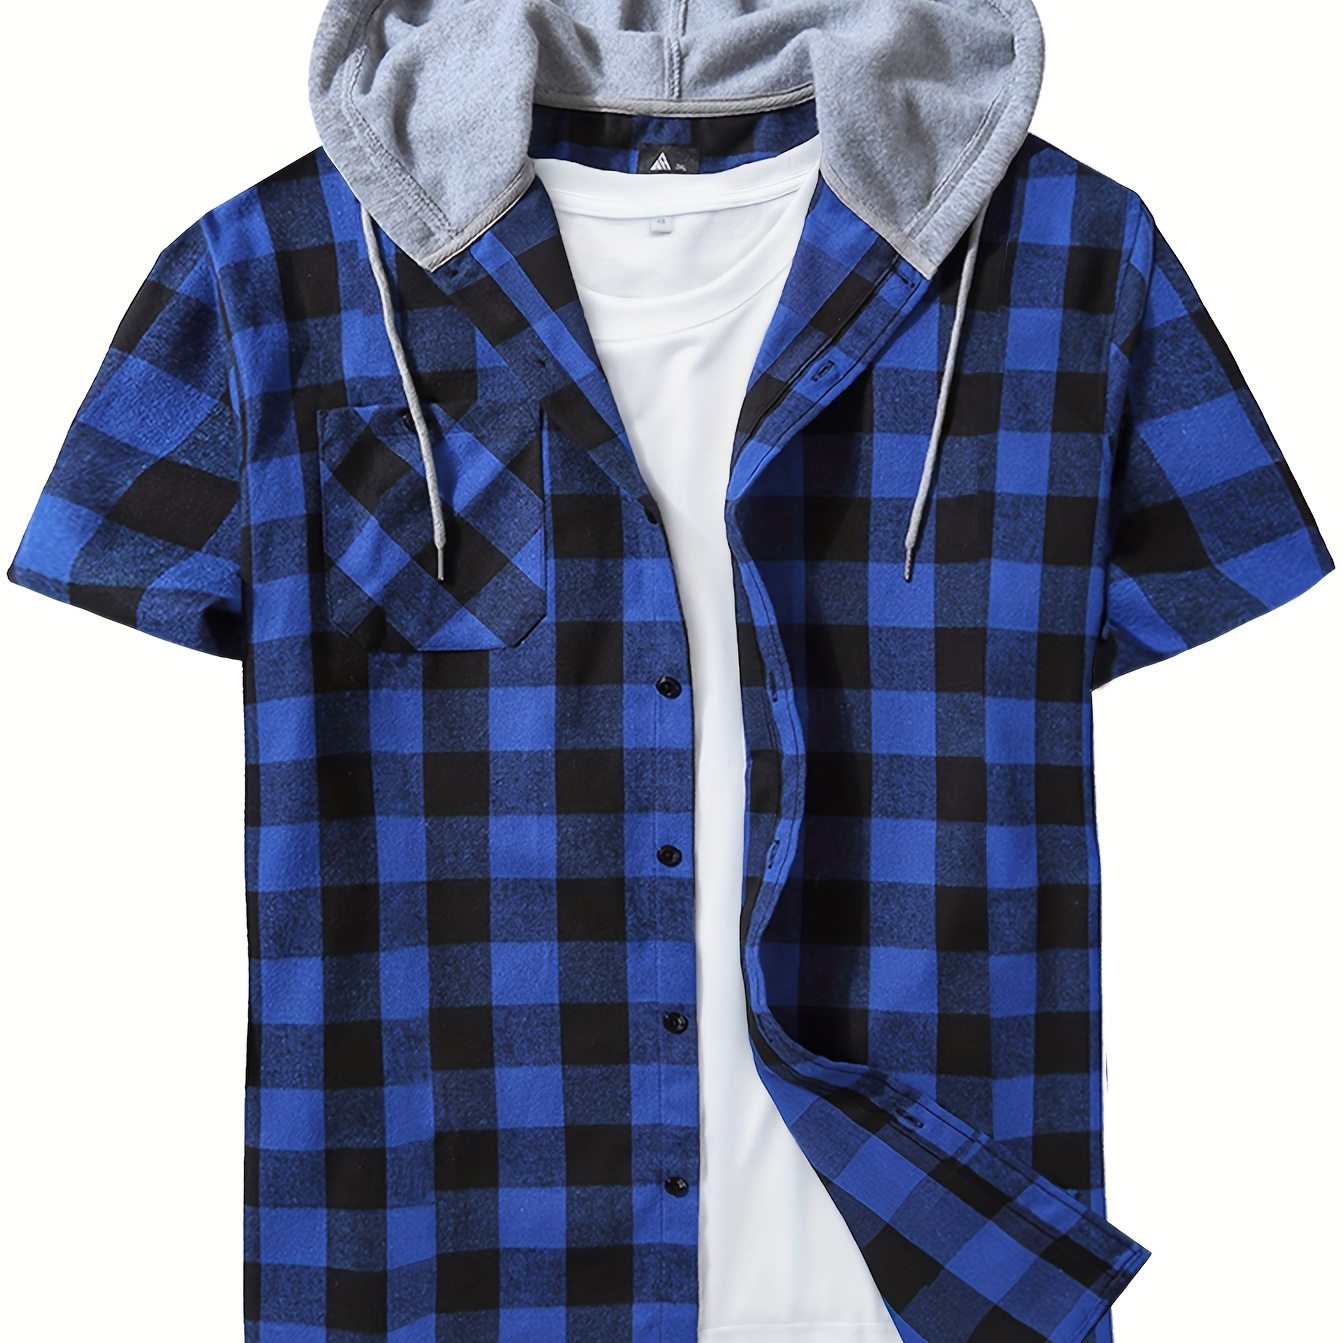 

Men's Casual Plaid Short Sleeve Shirt With Removable Hood, Button-up Checkered Summer Top For Daily Wear